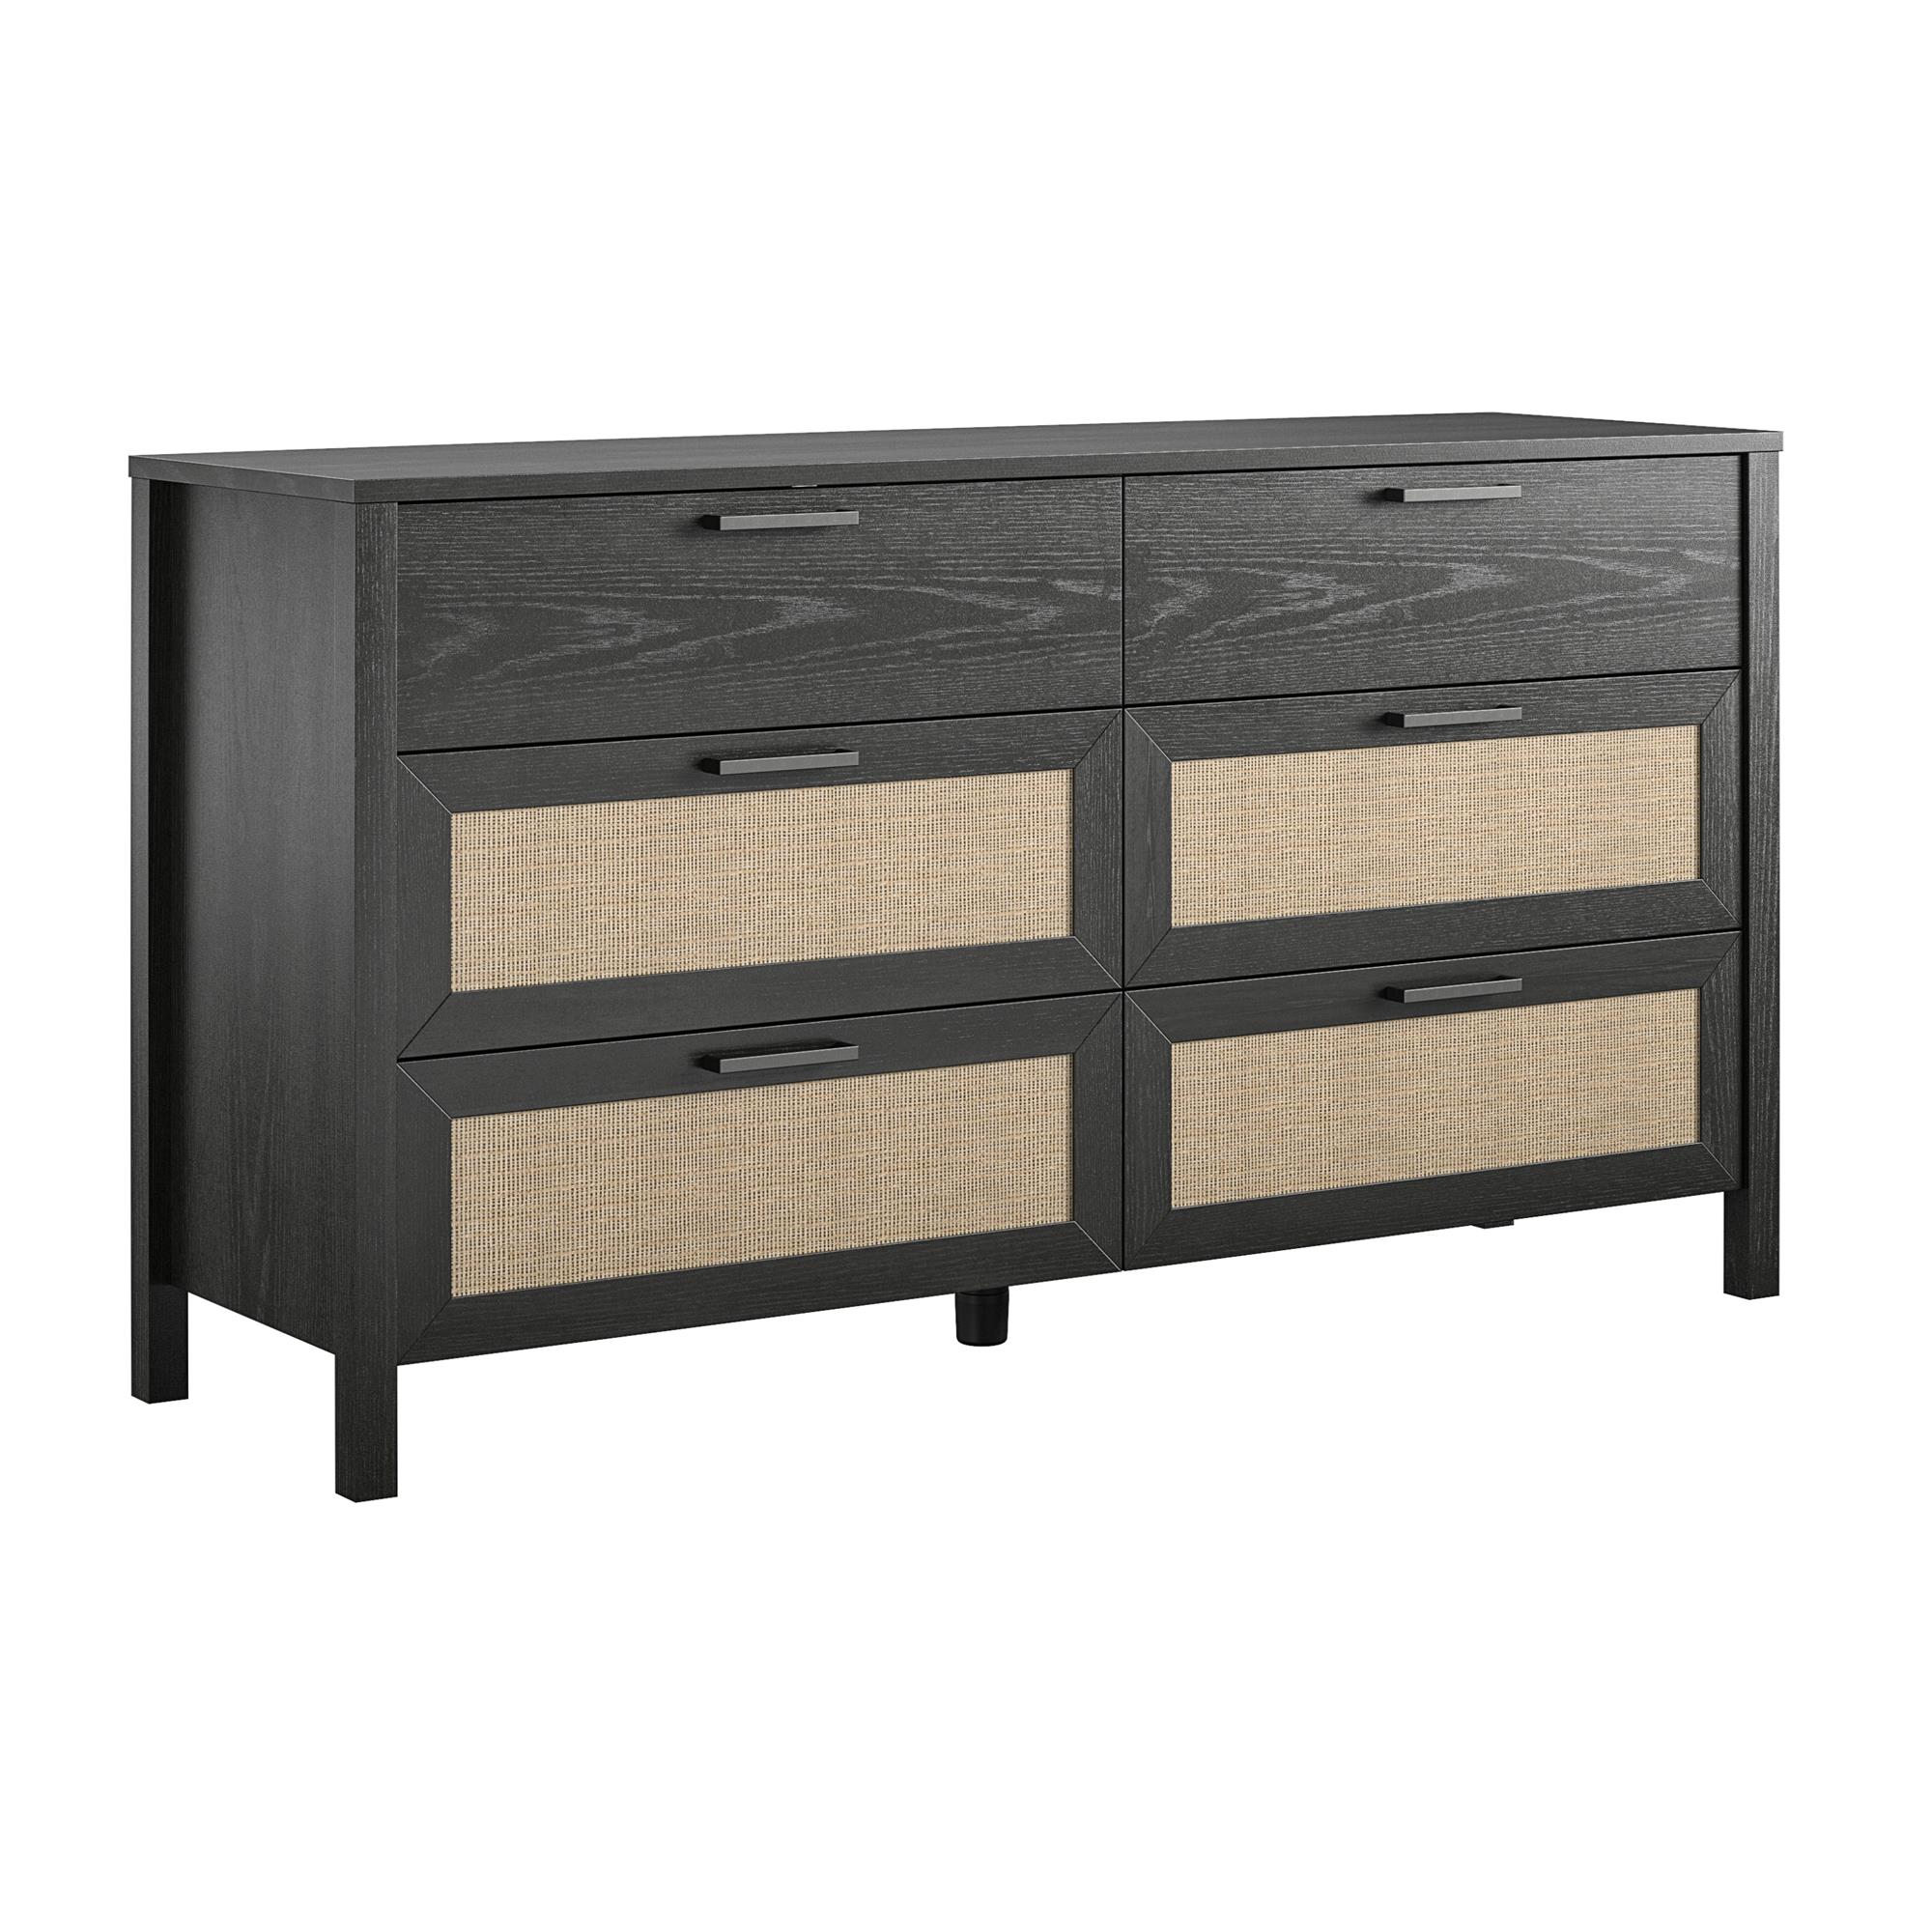 Ameriwood Home Wimberly 6-Drawer Dresser, Black Oak with Faux Rattan - image 4 of 16